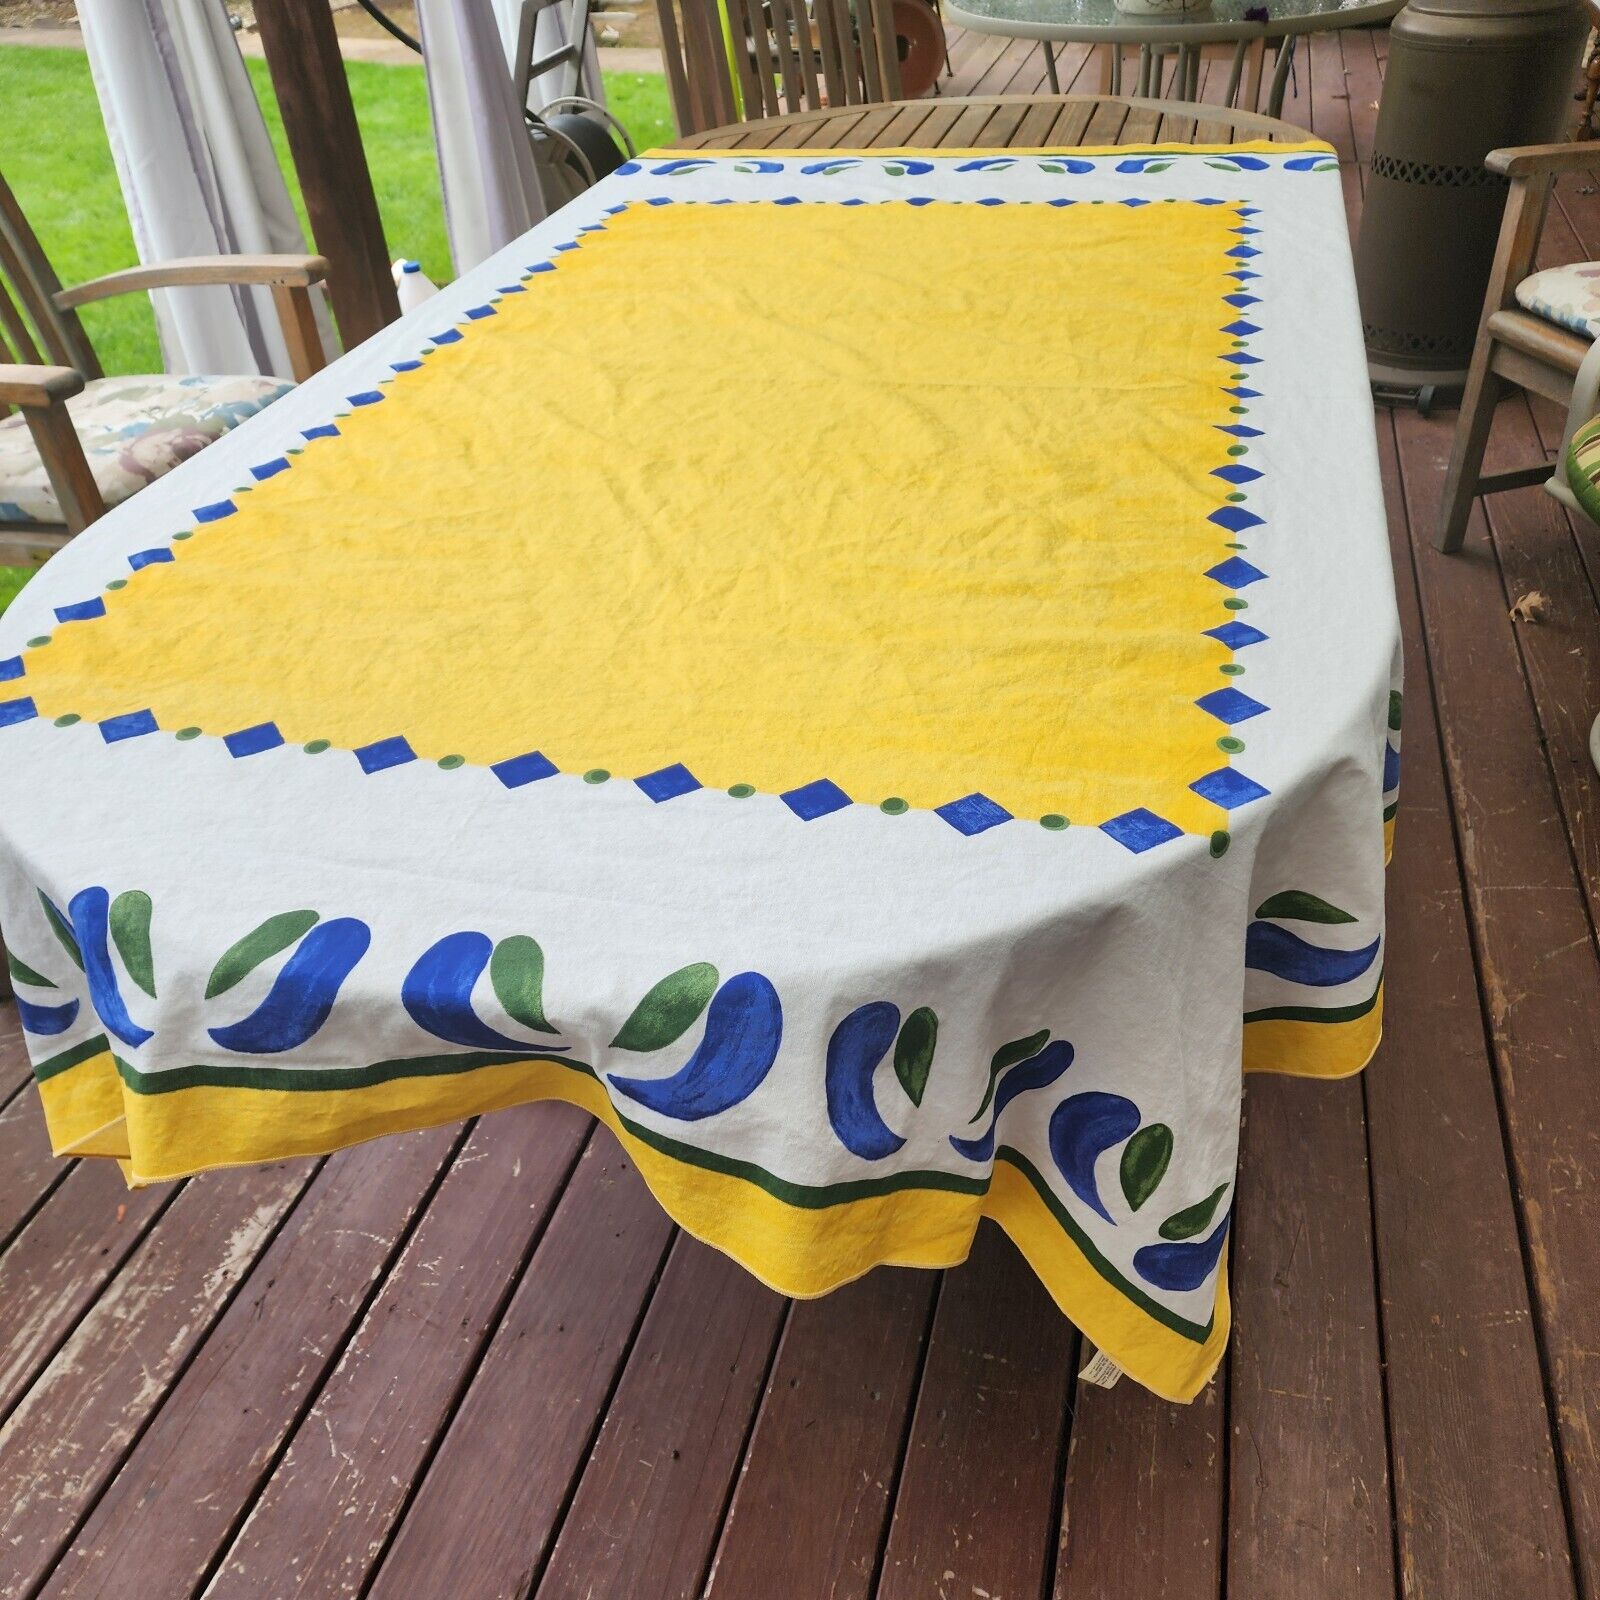 Cooks Club Tablecloth French Country Style Sunny Yellow Blue Green Cotton 82x62